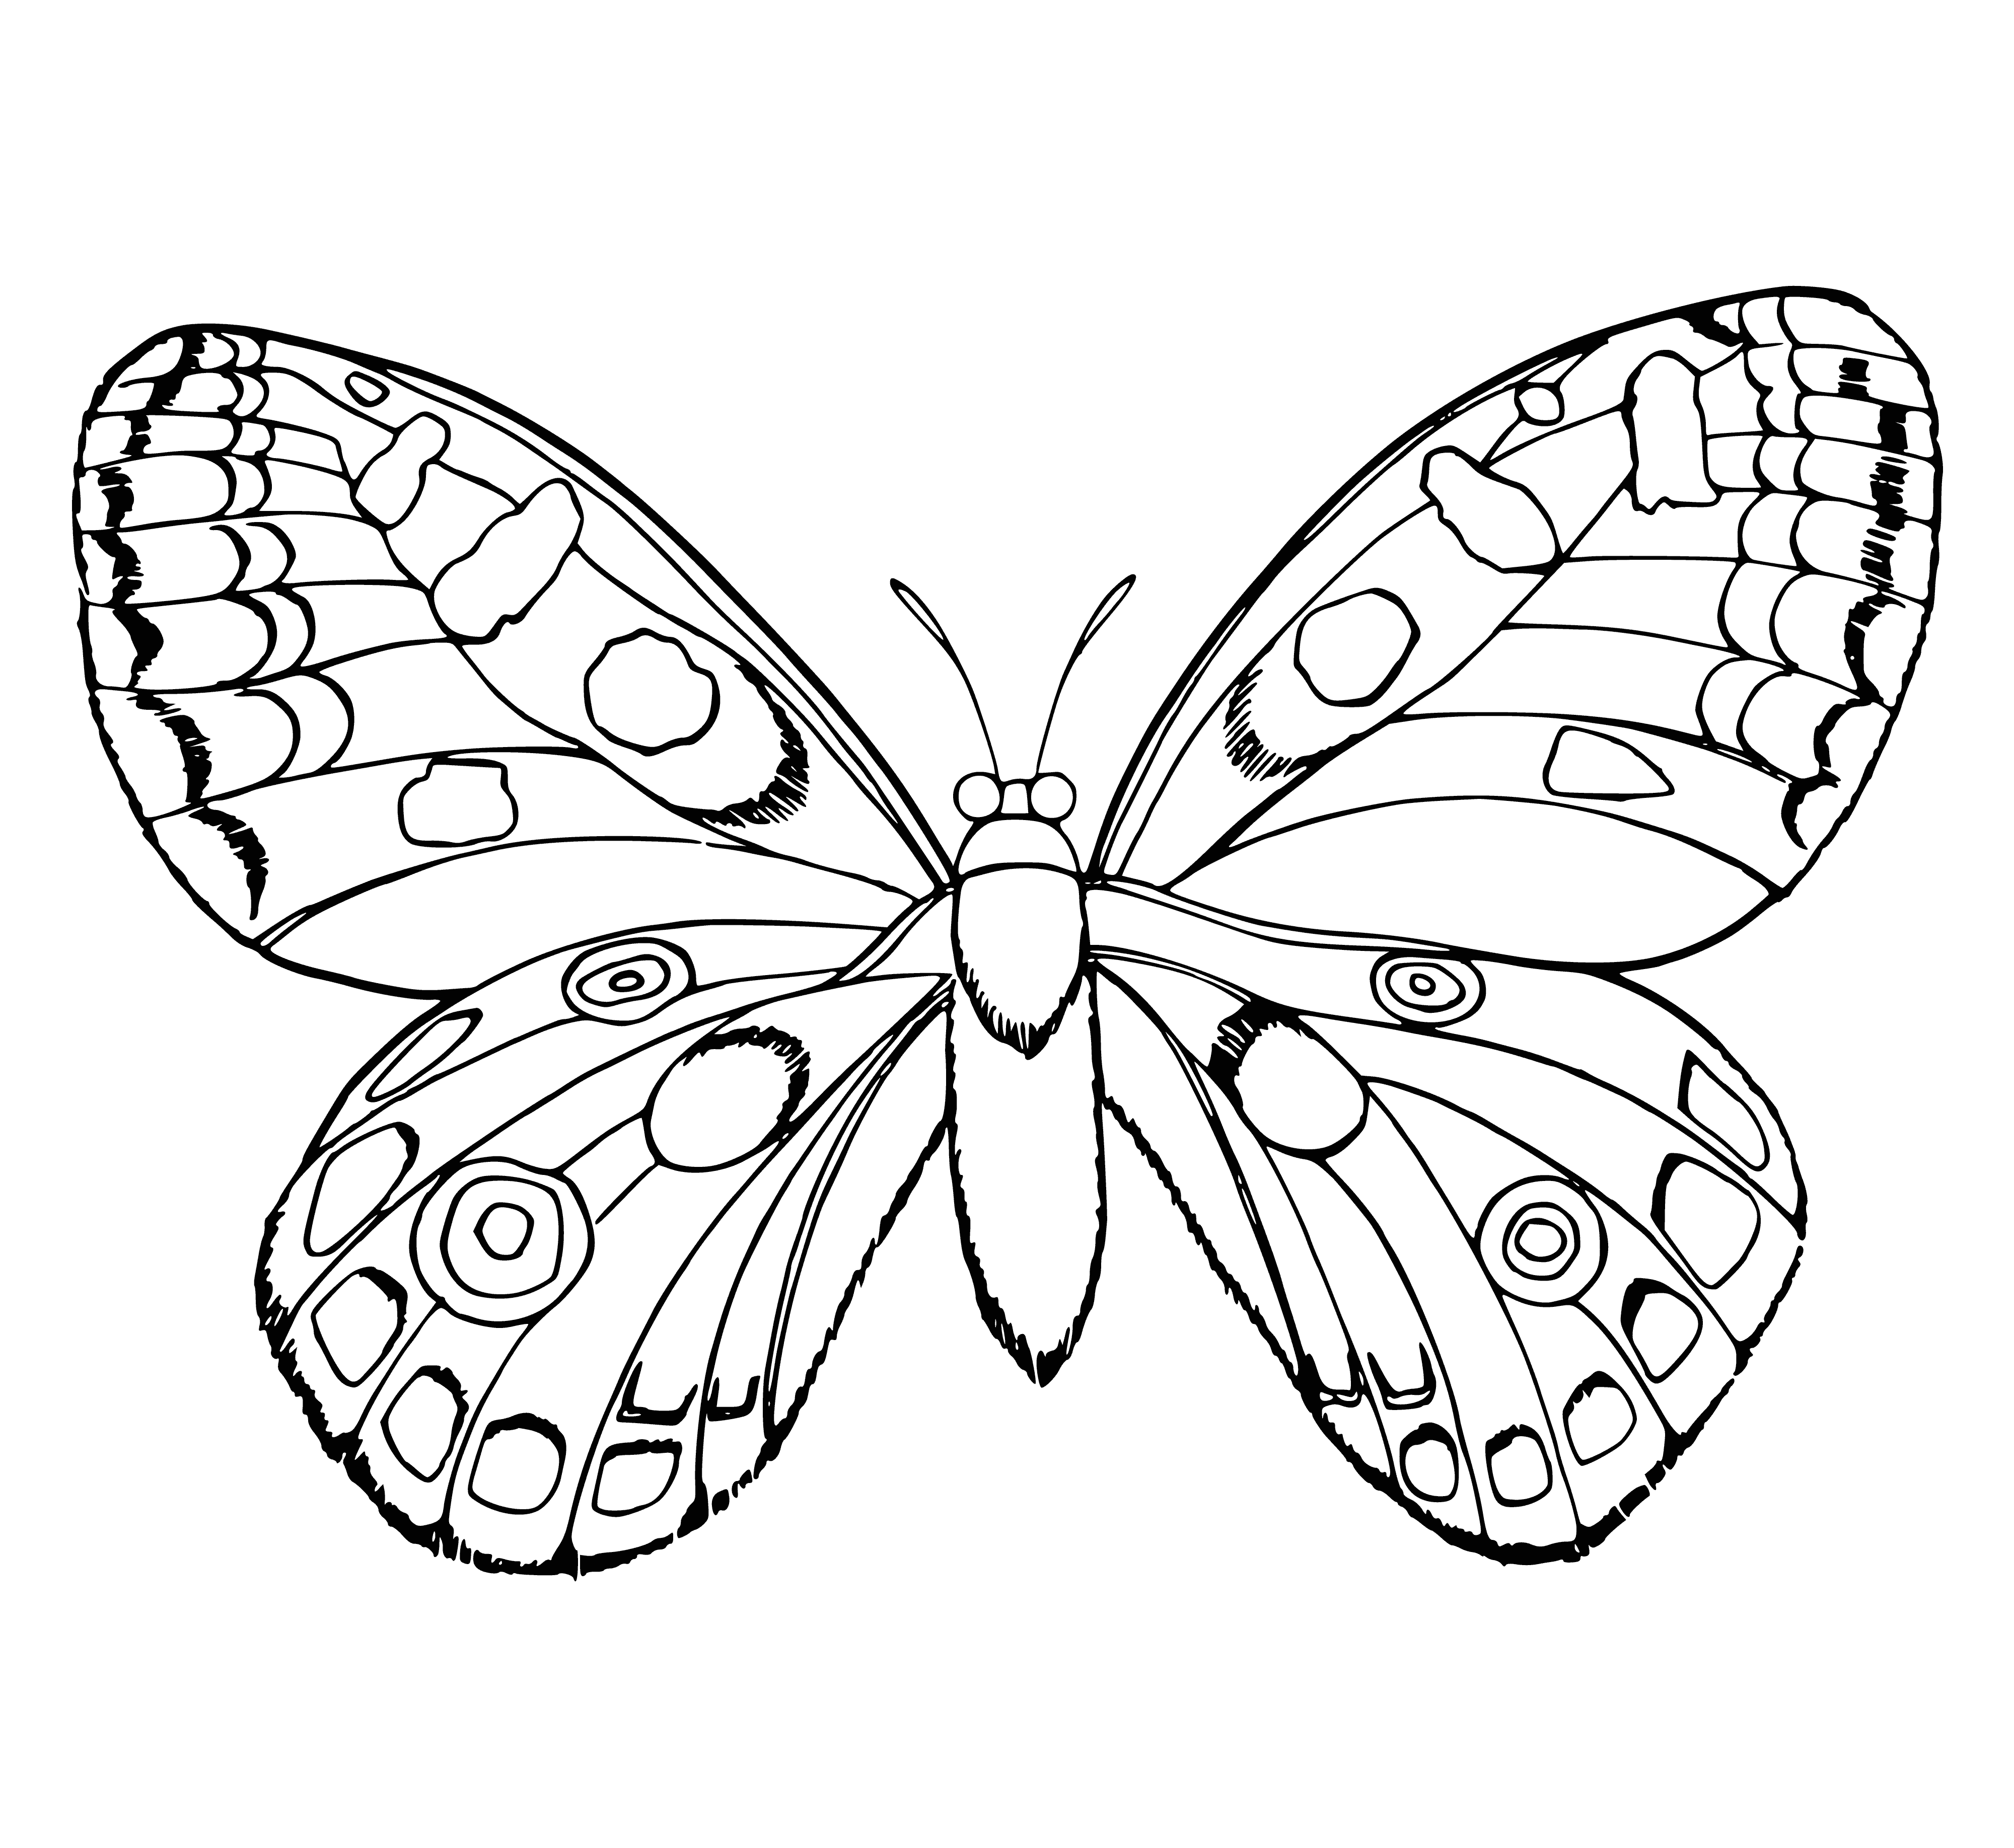 coloring page: Group of butterflies in vibrant colors, perched atop tree and basking in the sun; some flying away, others still.